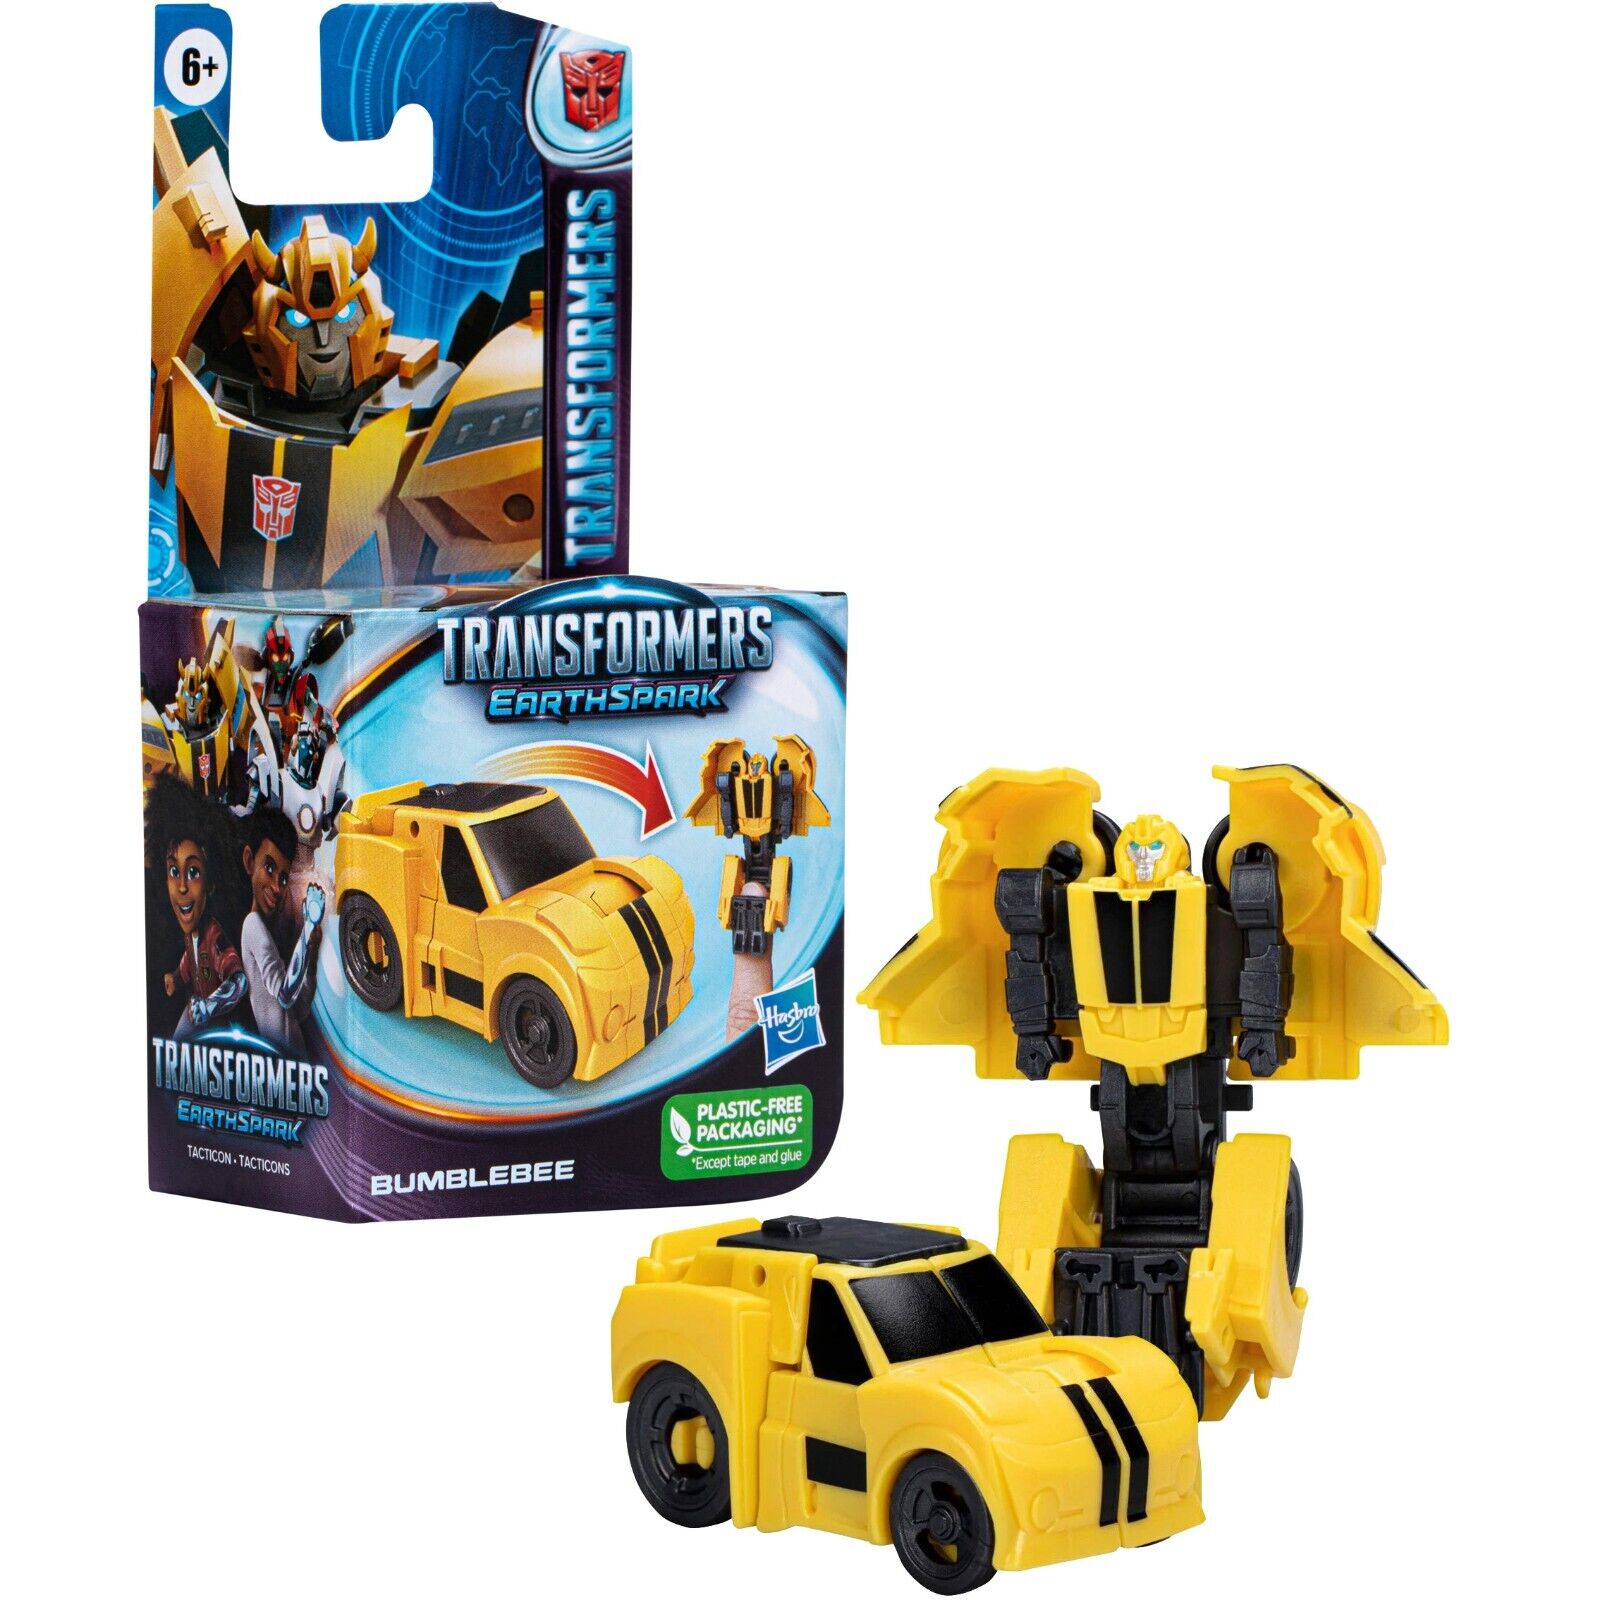 TRANSFORMERS EARTHSPARK TACTICON ASSORTED - BUMBLEBEE